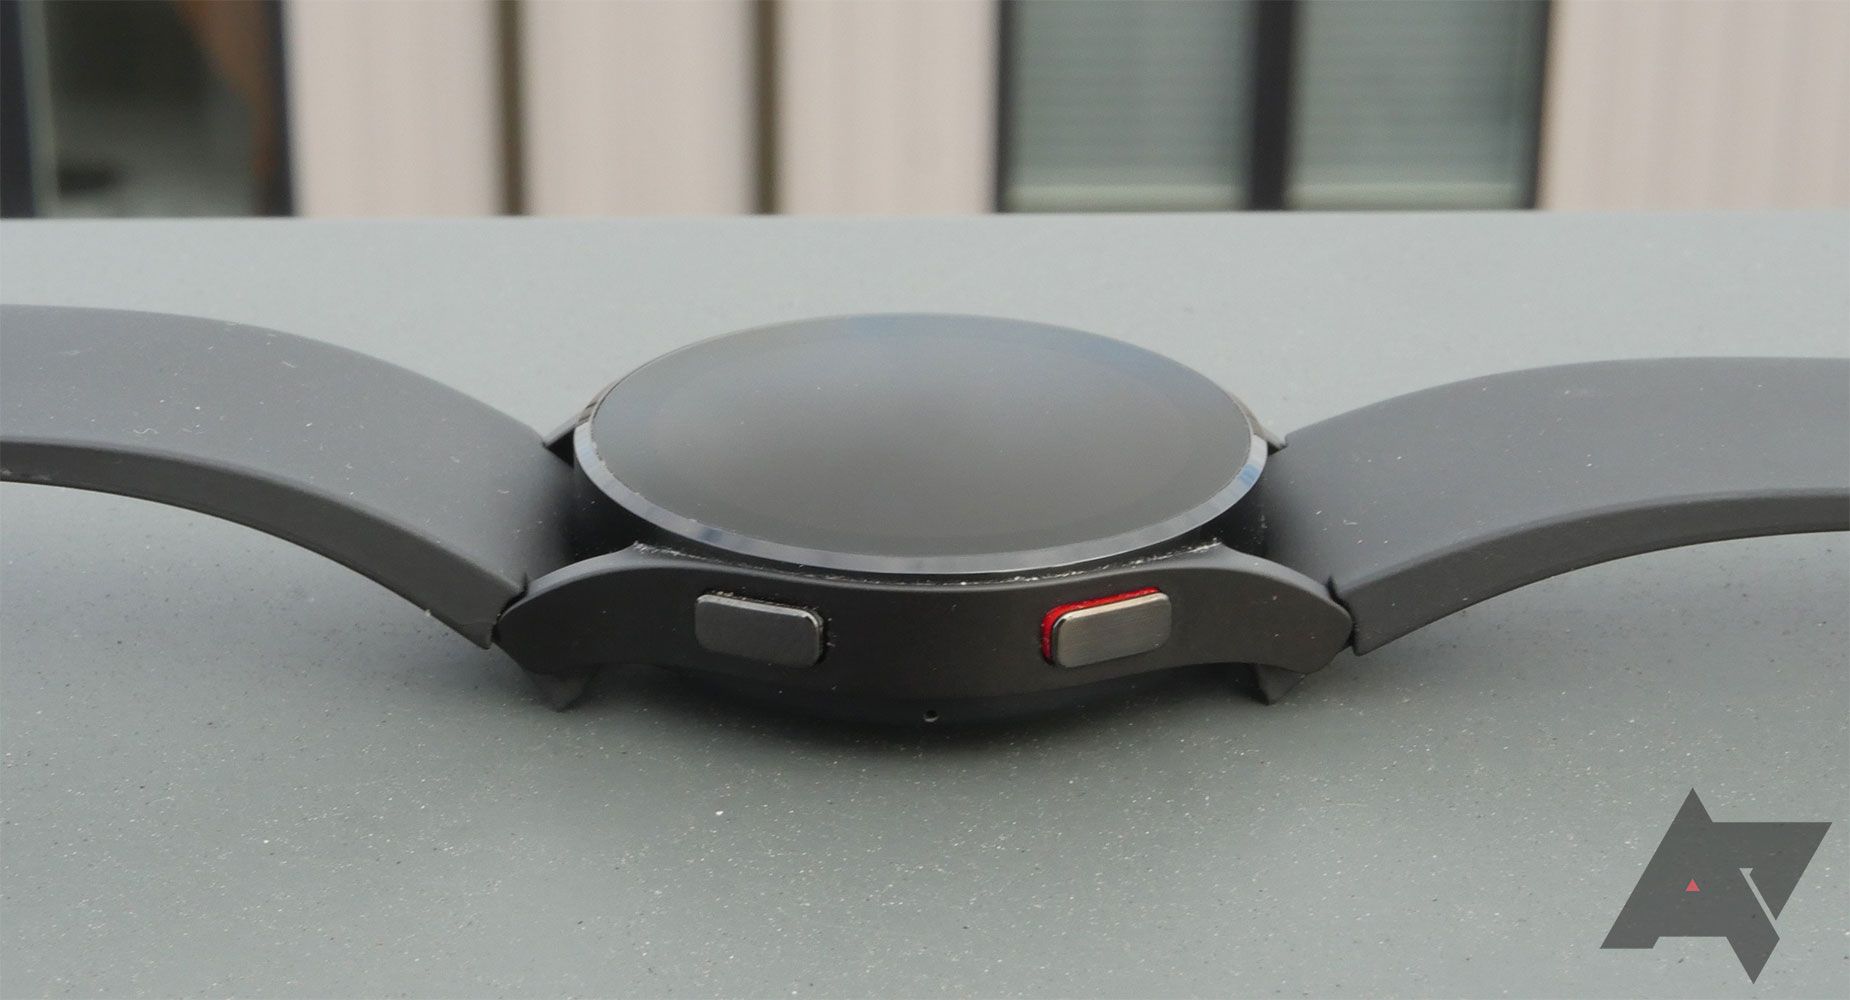 A smartwatch sitting on a table.